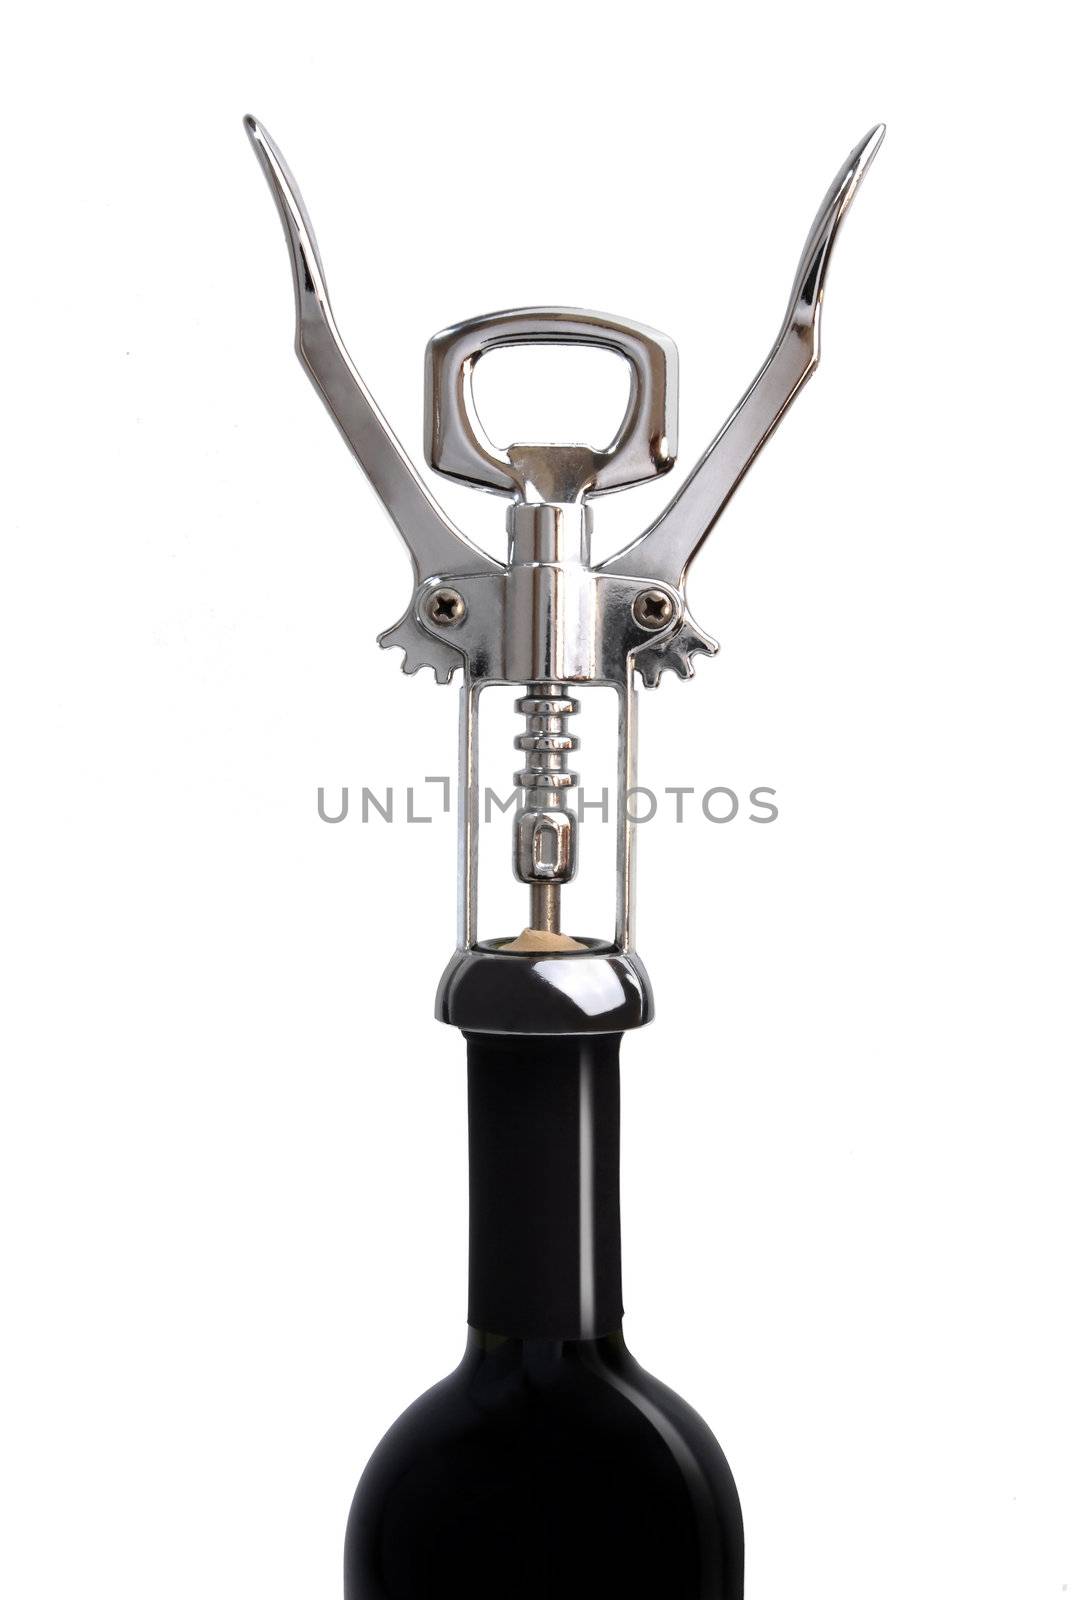 Corkscrew on a bottle of wine. Isolated on white background